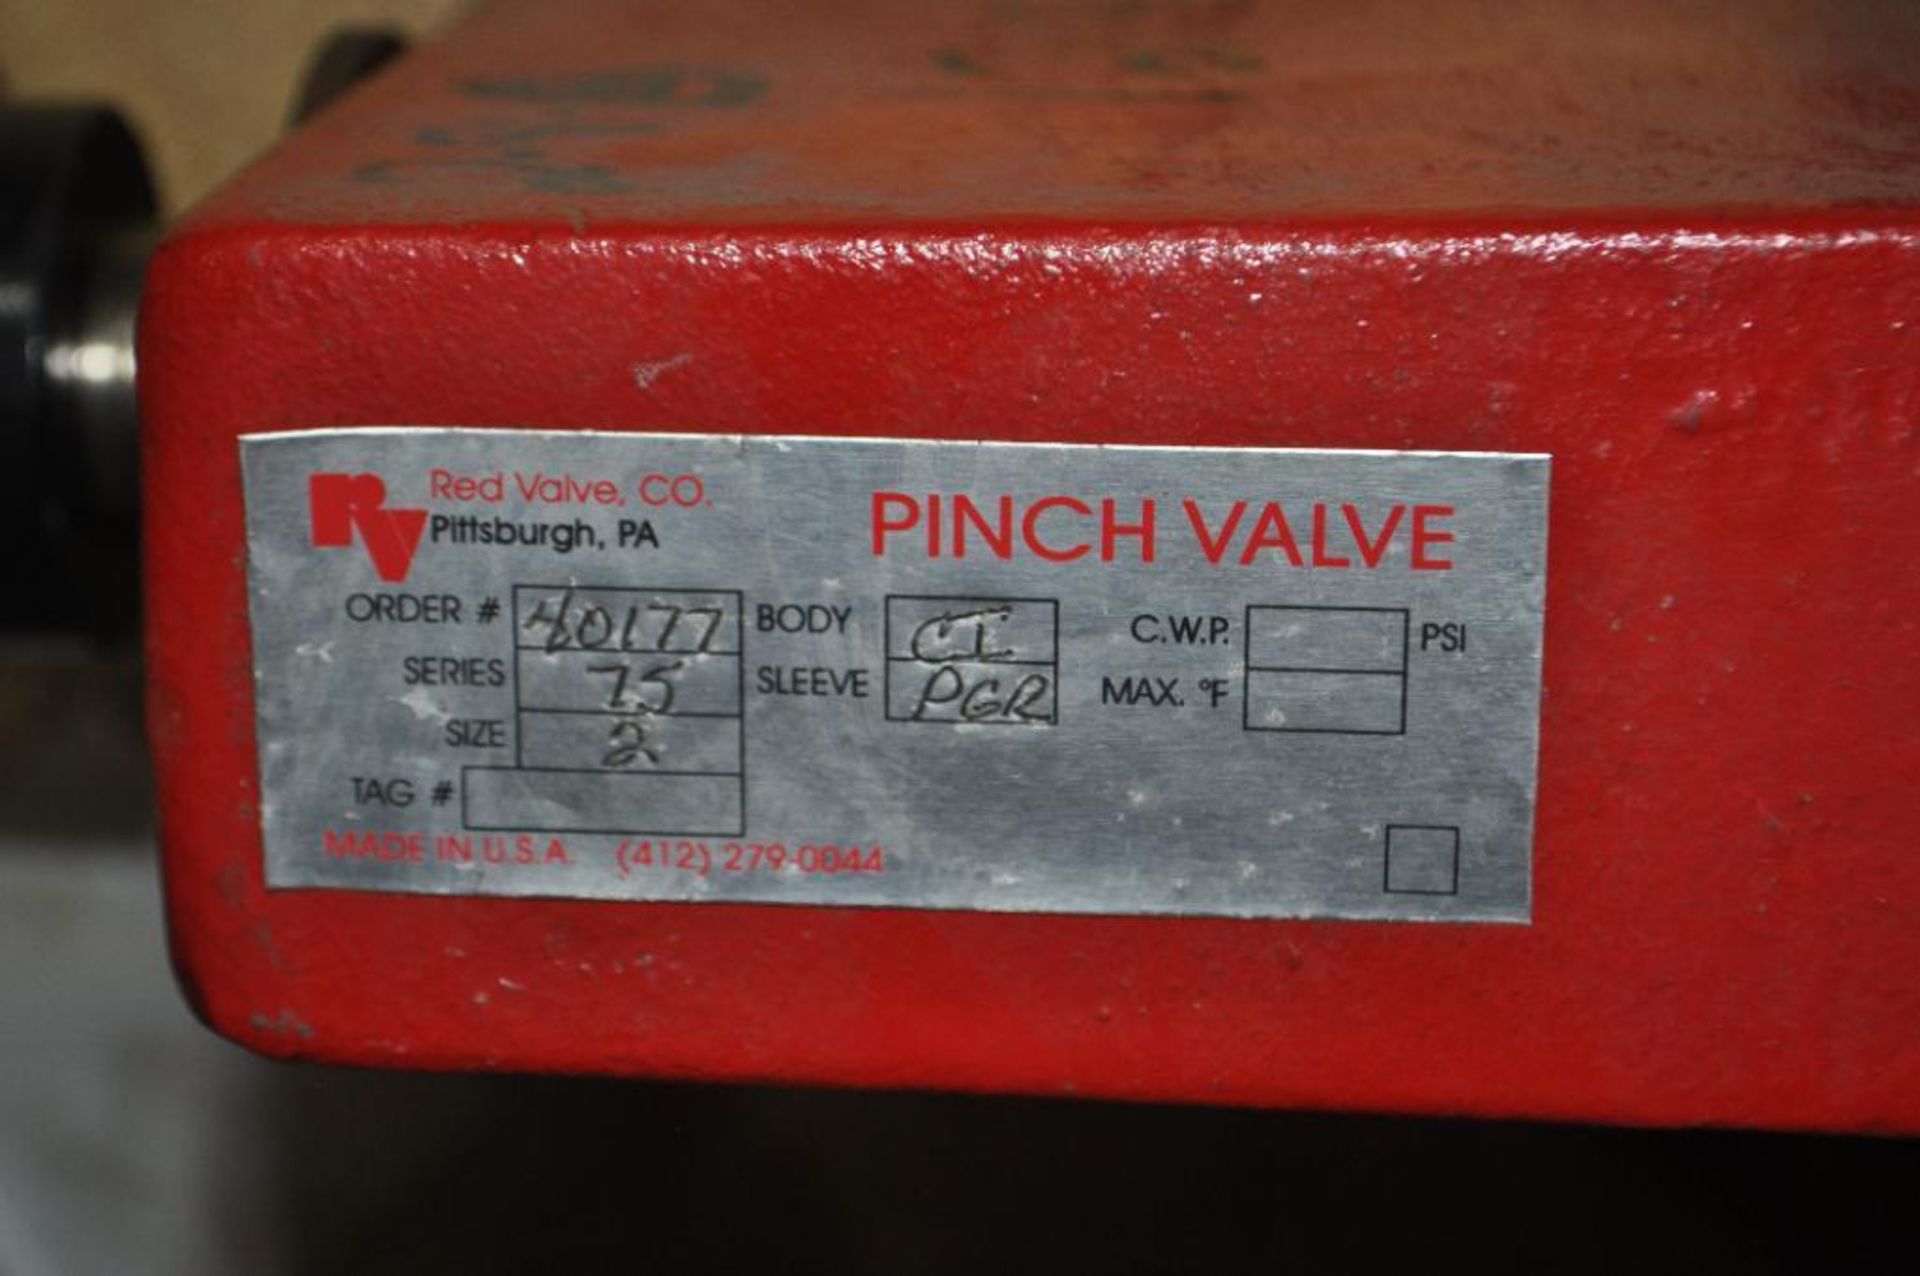 (3X) RED VALVE COMPANY INC. PINCH VALVES: (2) SIZE: 2'', (1) SIZE: 3'', SERIES 75 - Image 3 of 4